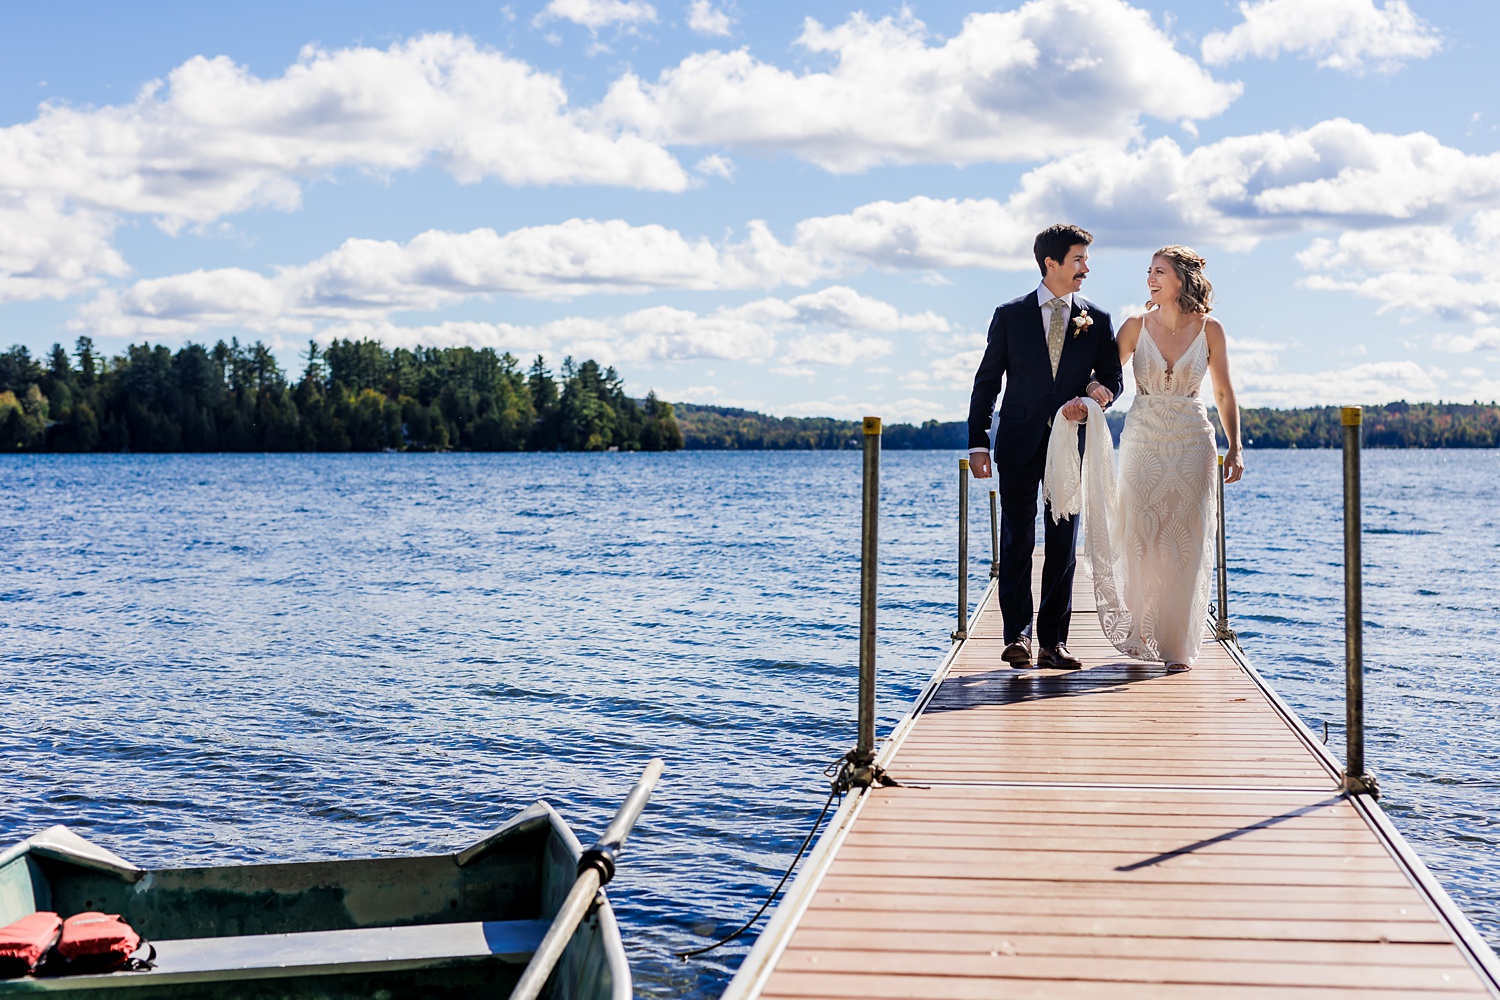 Walking out on the dock after hanging out for their first look